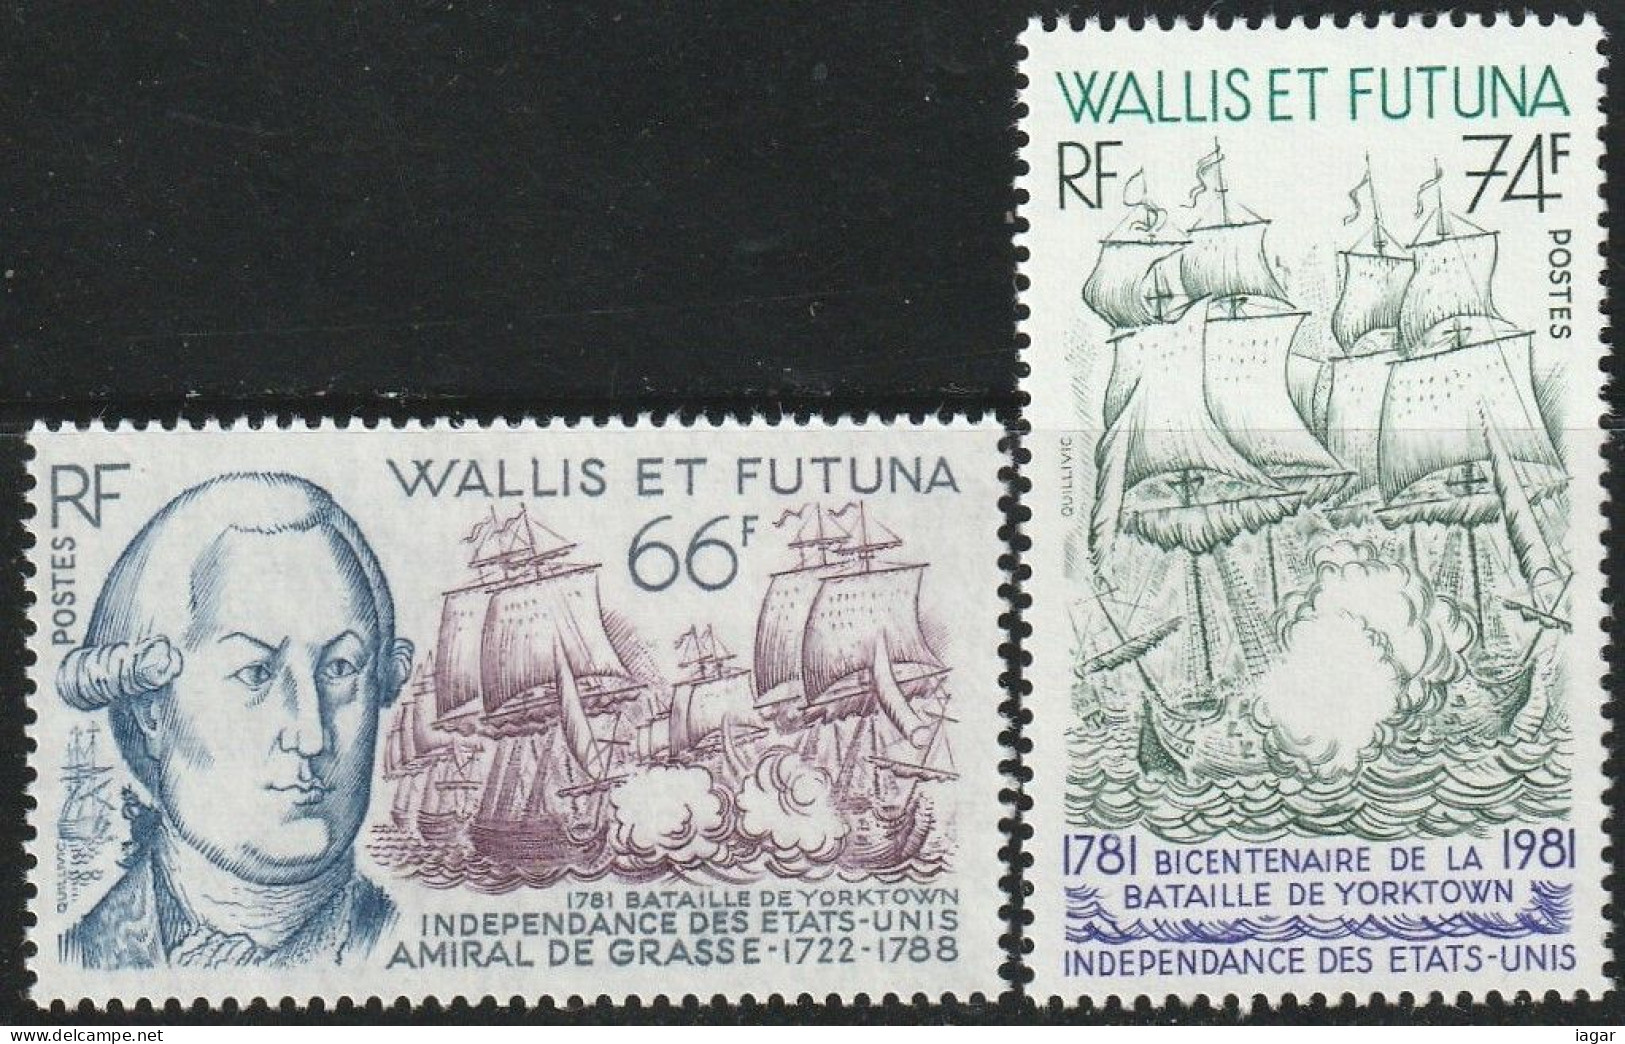 THEMATIC HISTORY:  INDEPENDENCE OF THE UNITED STATES, BATTLE OF YORKTOWN. ASPECTS OF NAVAL BATTLE  -  WALLIS AND FUTUNA - Unabhängigkeit USA